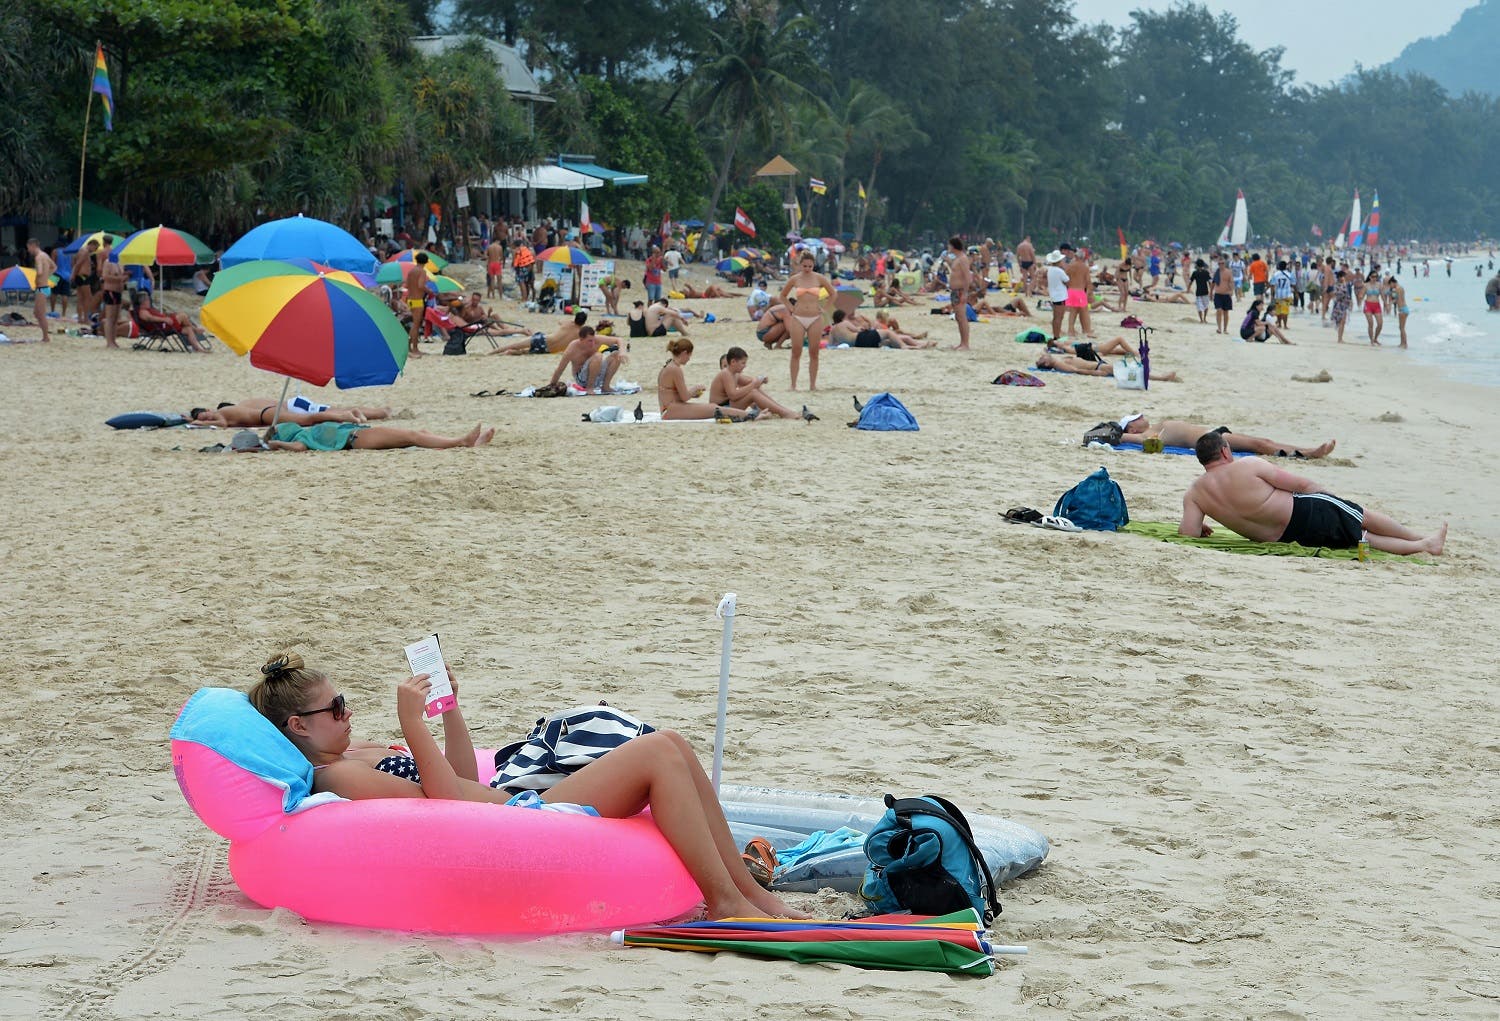 Foreign tourists relax at Patong beach in Phuket province on December 25, 2014. In the morning of December 26, 2004 a 9.3-magnitude earthquake off Indonesia's western coast generated a series of massive waves that killed more than 220,000 people across 14 countries as far apart as Indonesia, Sri Lanka and Somalia. AFP PHOTO/Pornchai KITTIWONGSAKUL